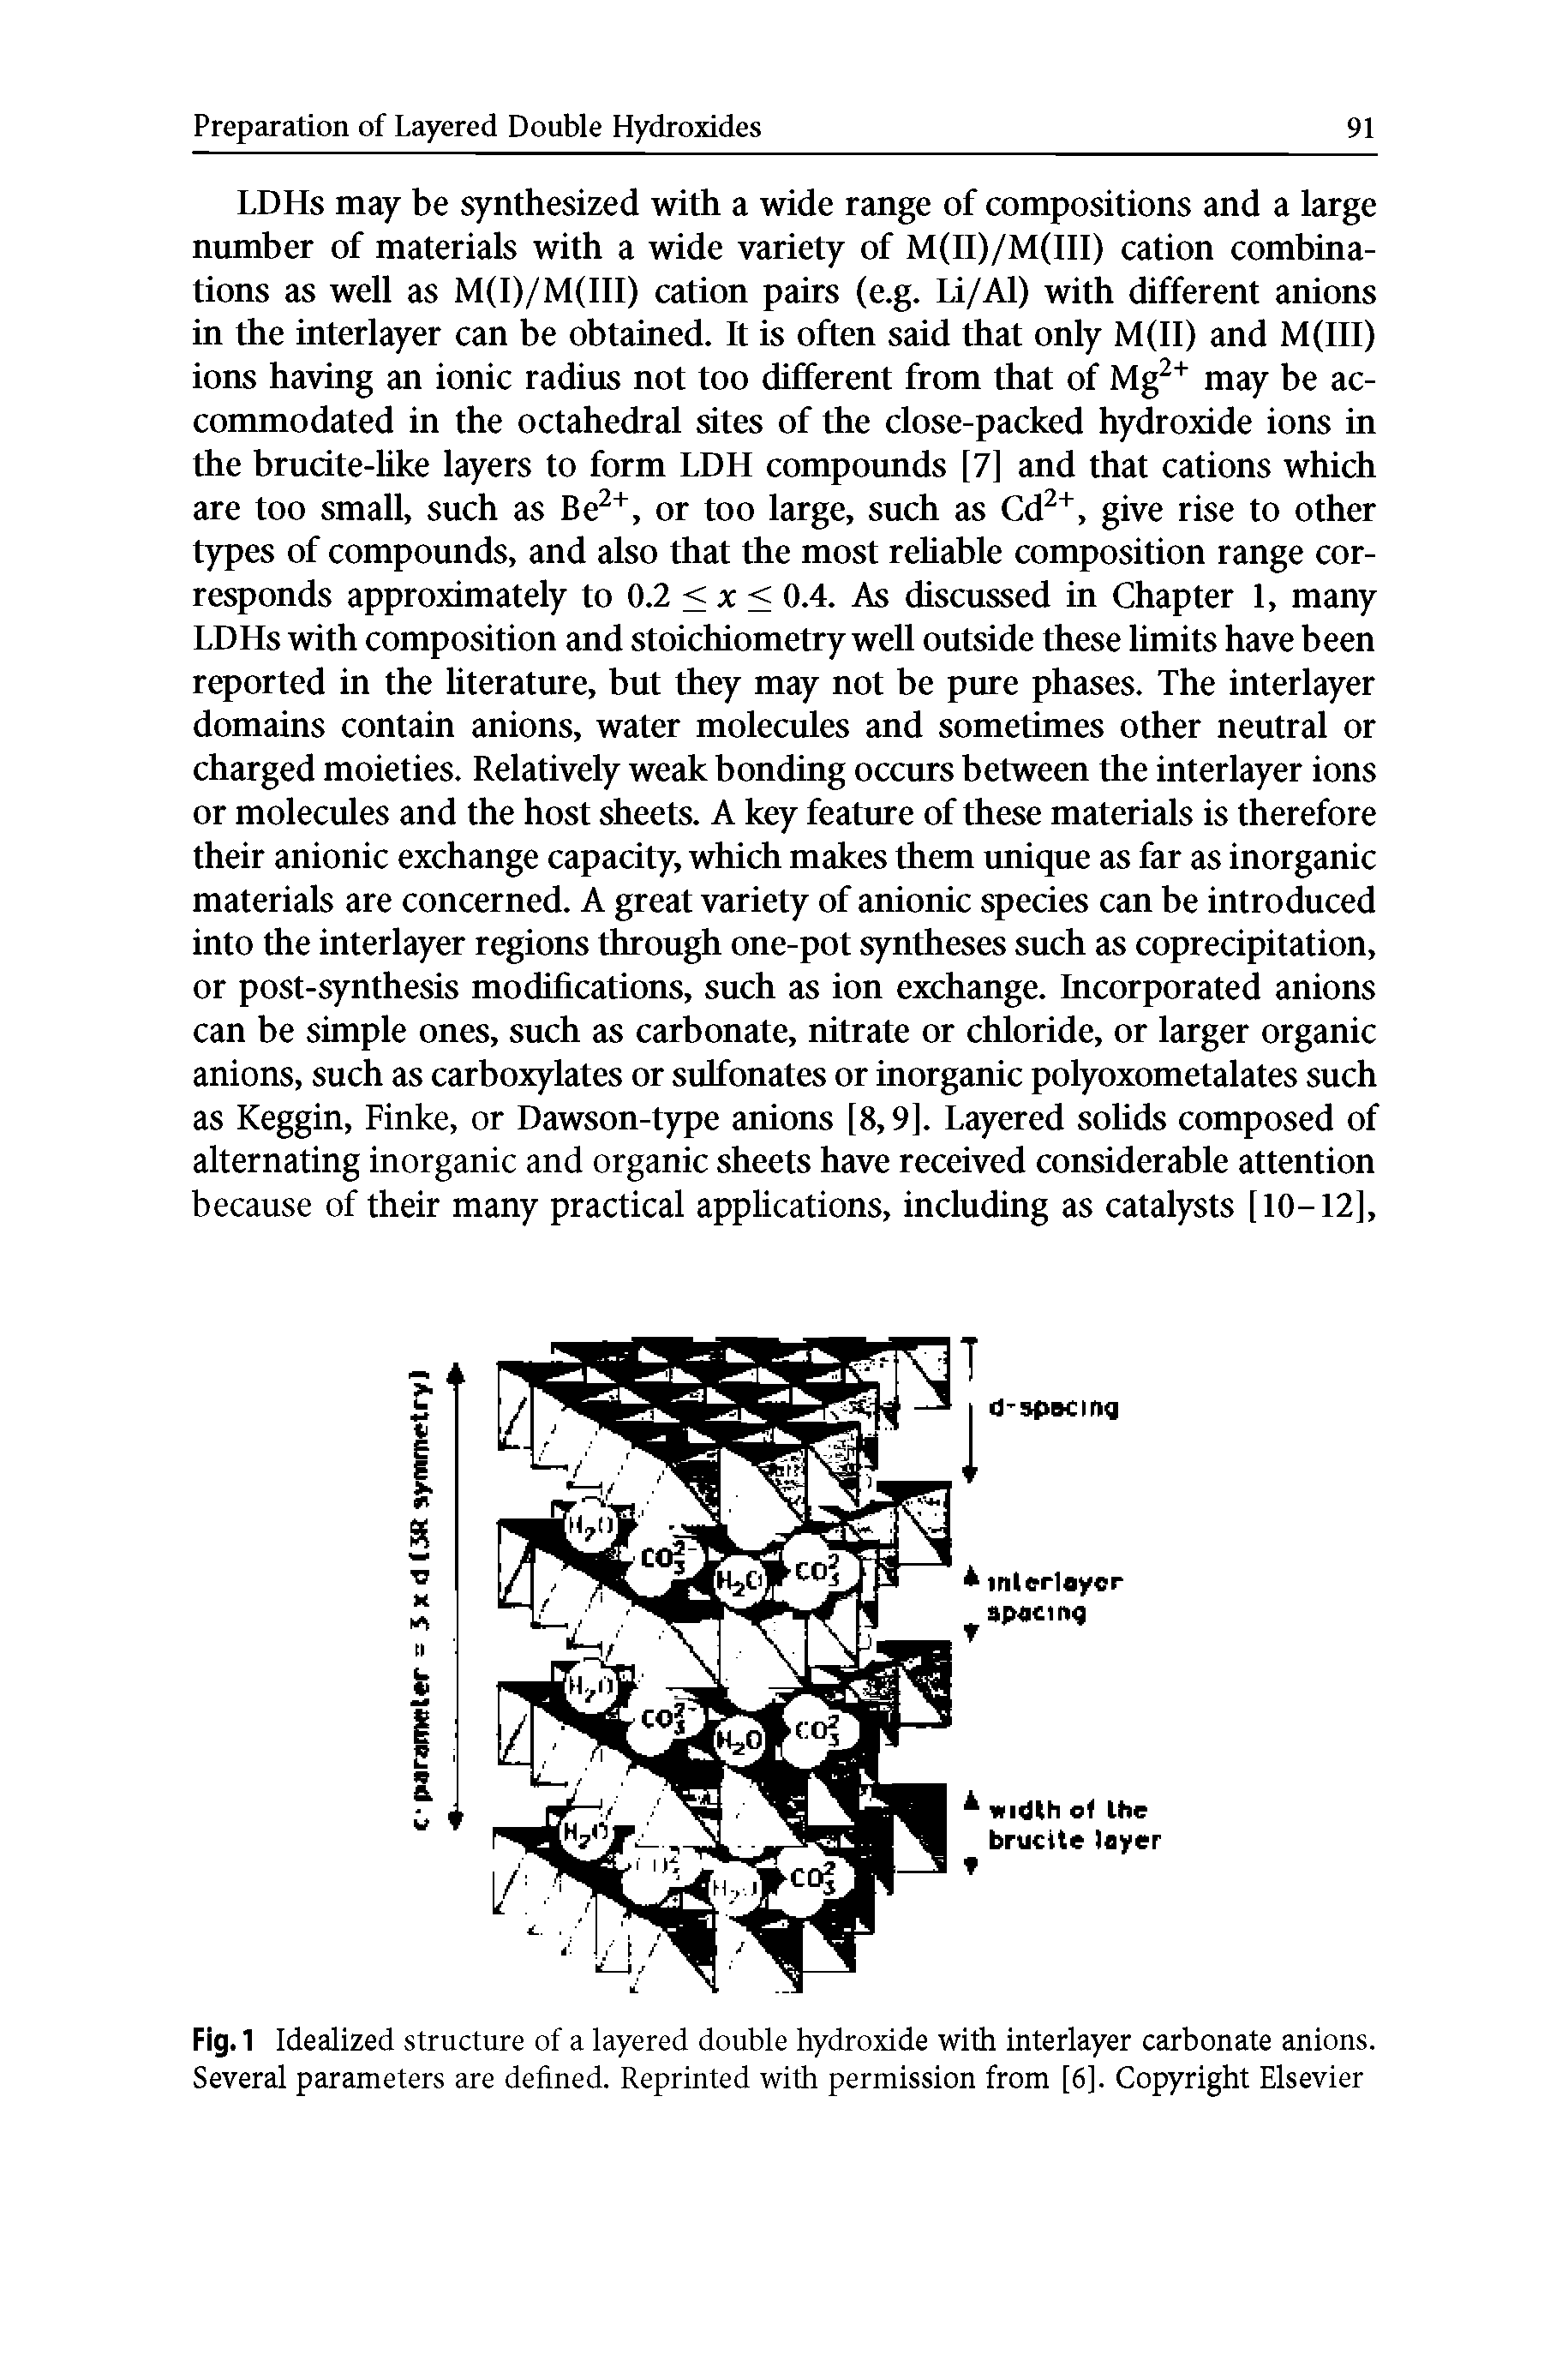 Fig.1 Idealized structure of a layered double hydroxide with interlayer carbonate anions. Several parameters are defined. Reprinted with permission from [6]. Copyright Elsevier...